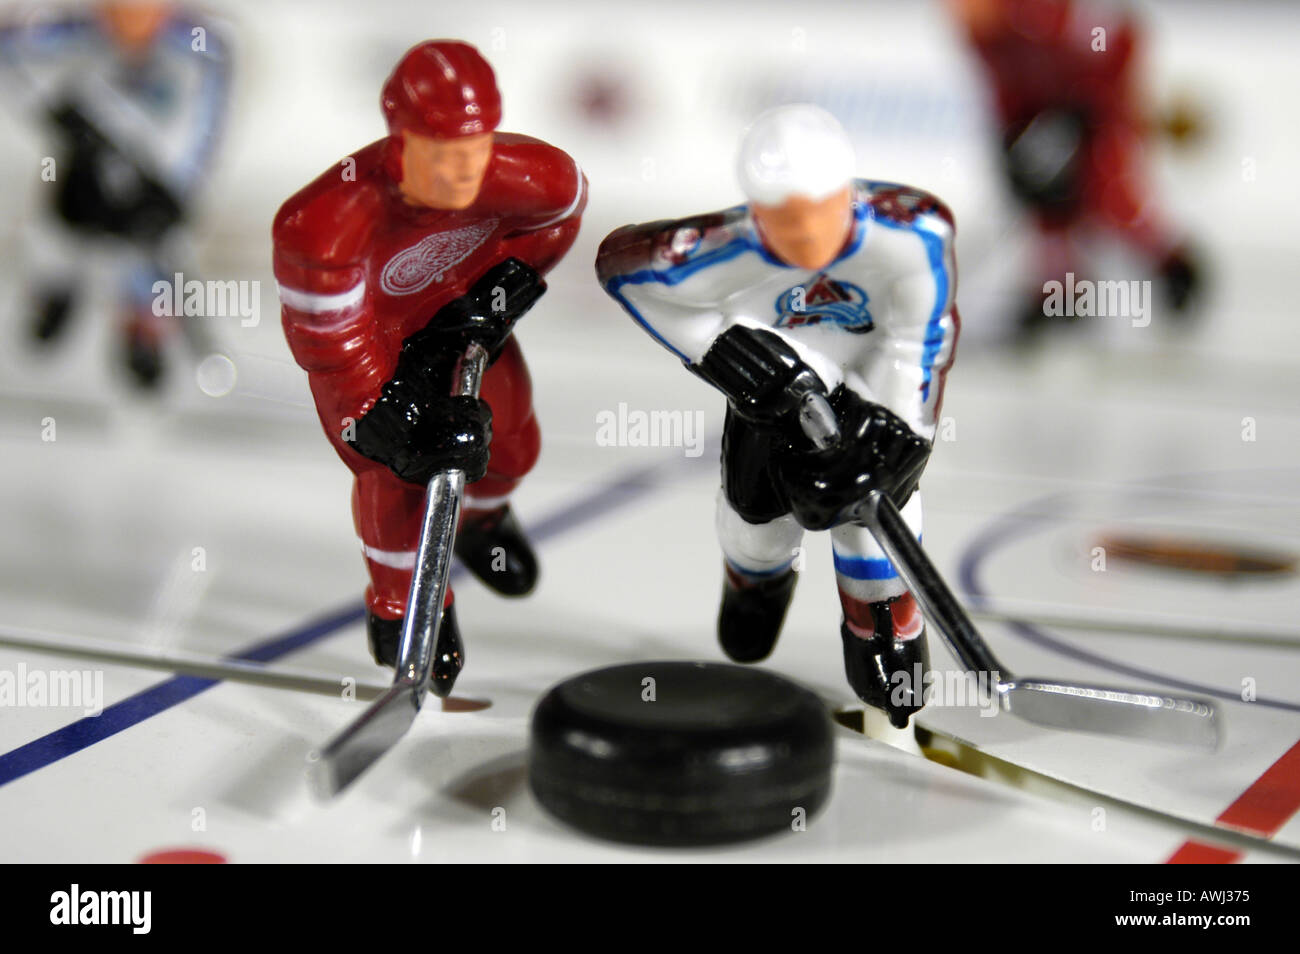 Toy Stiga Stanley Cup Hockey table game players Detroit Red Wings and  Colorado Avalanche Stock Photo - Alamy